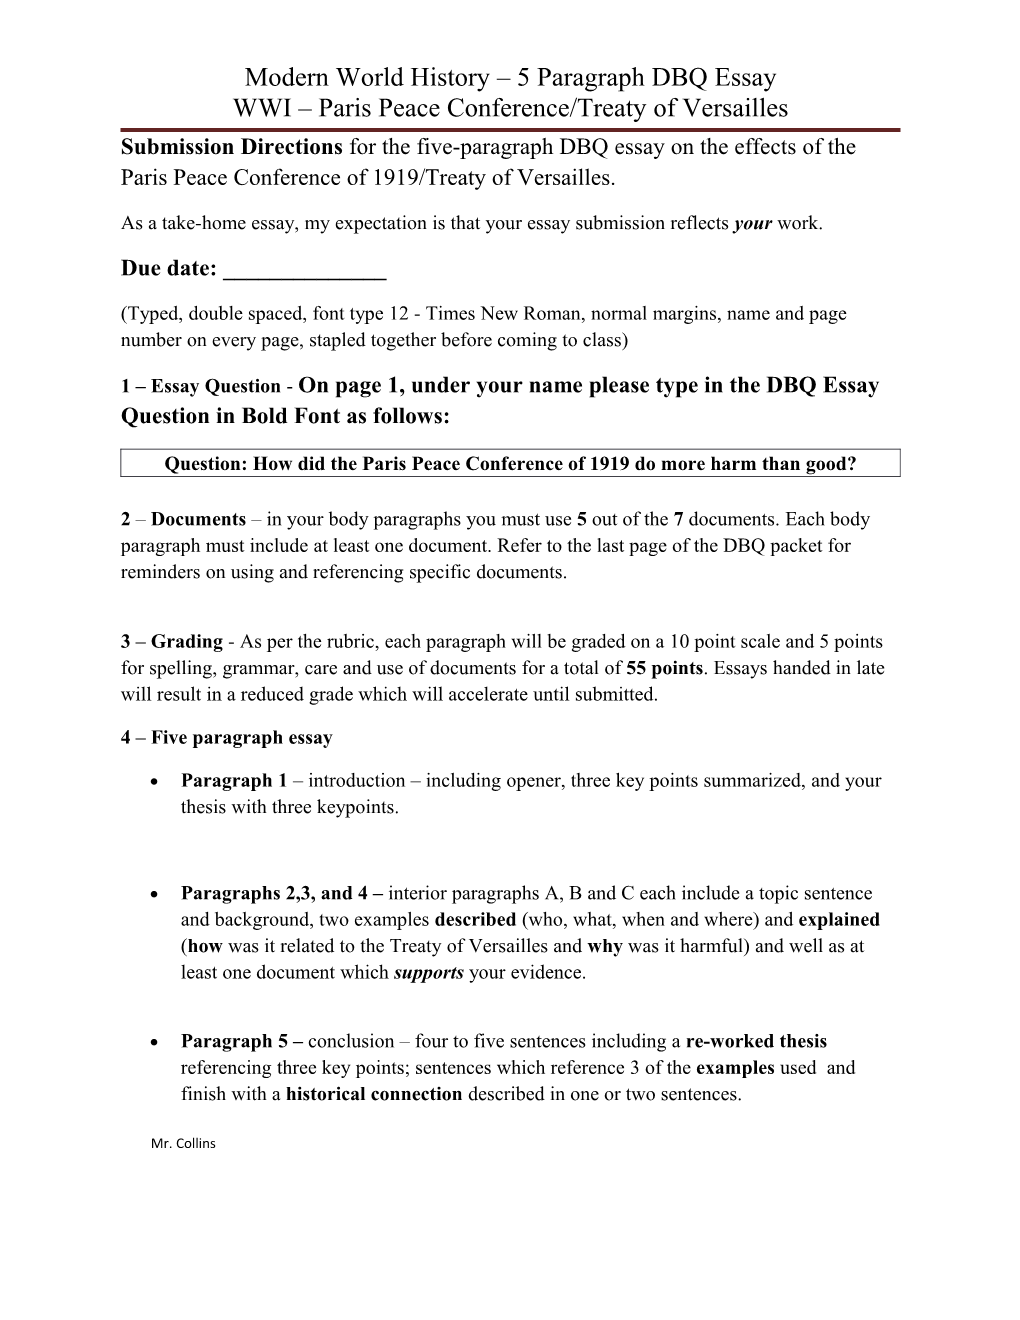 Modern World History 5 Paragraph DBQ Essay WWI Paris Peace Conference/Treaty of Versailles